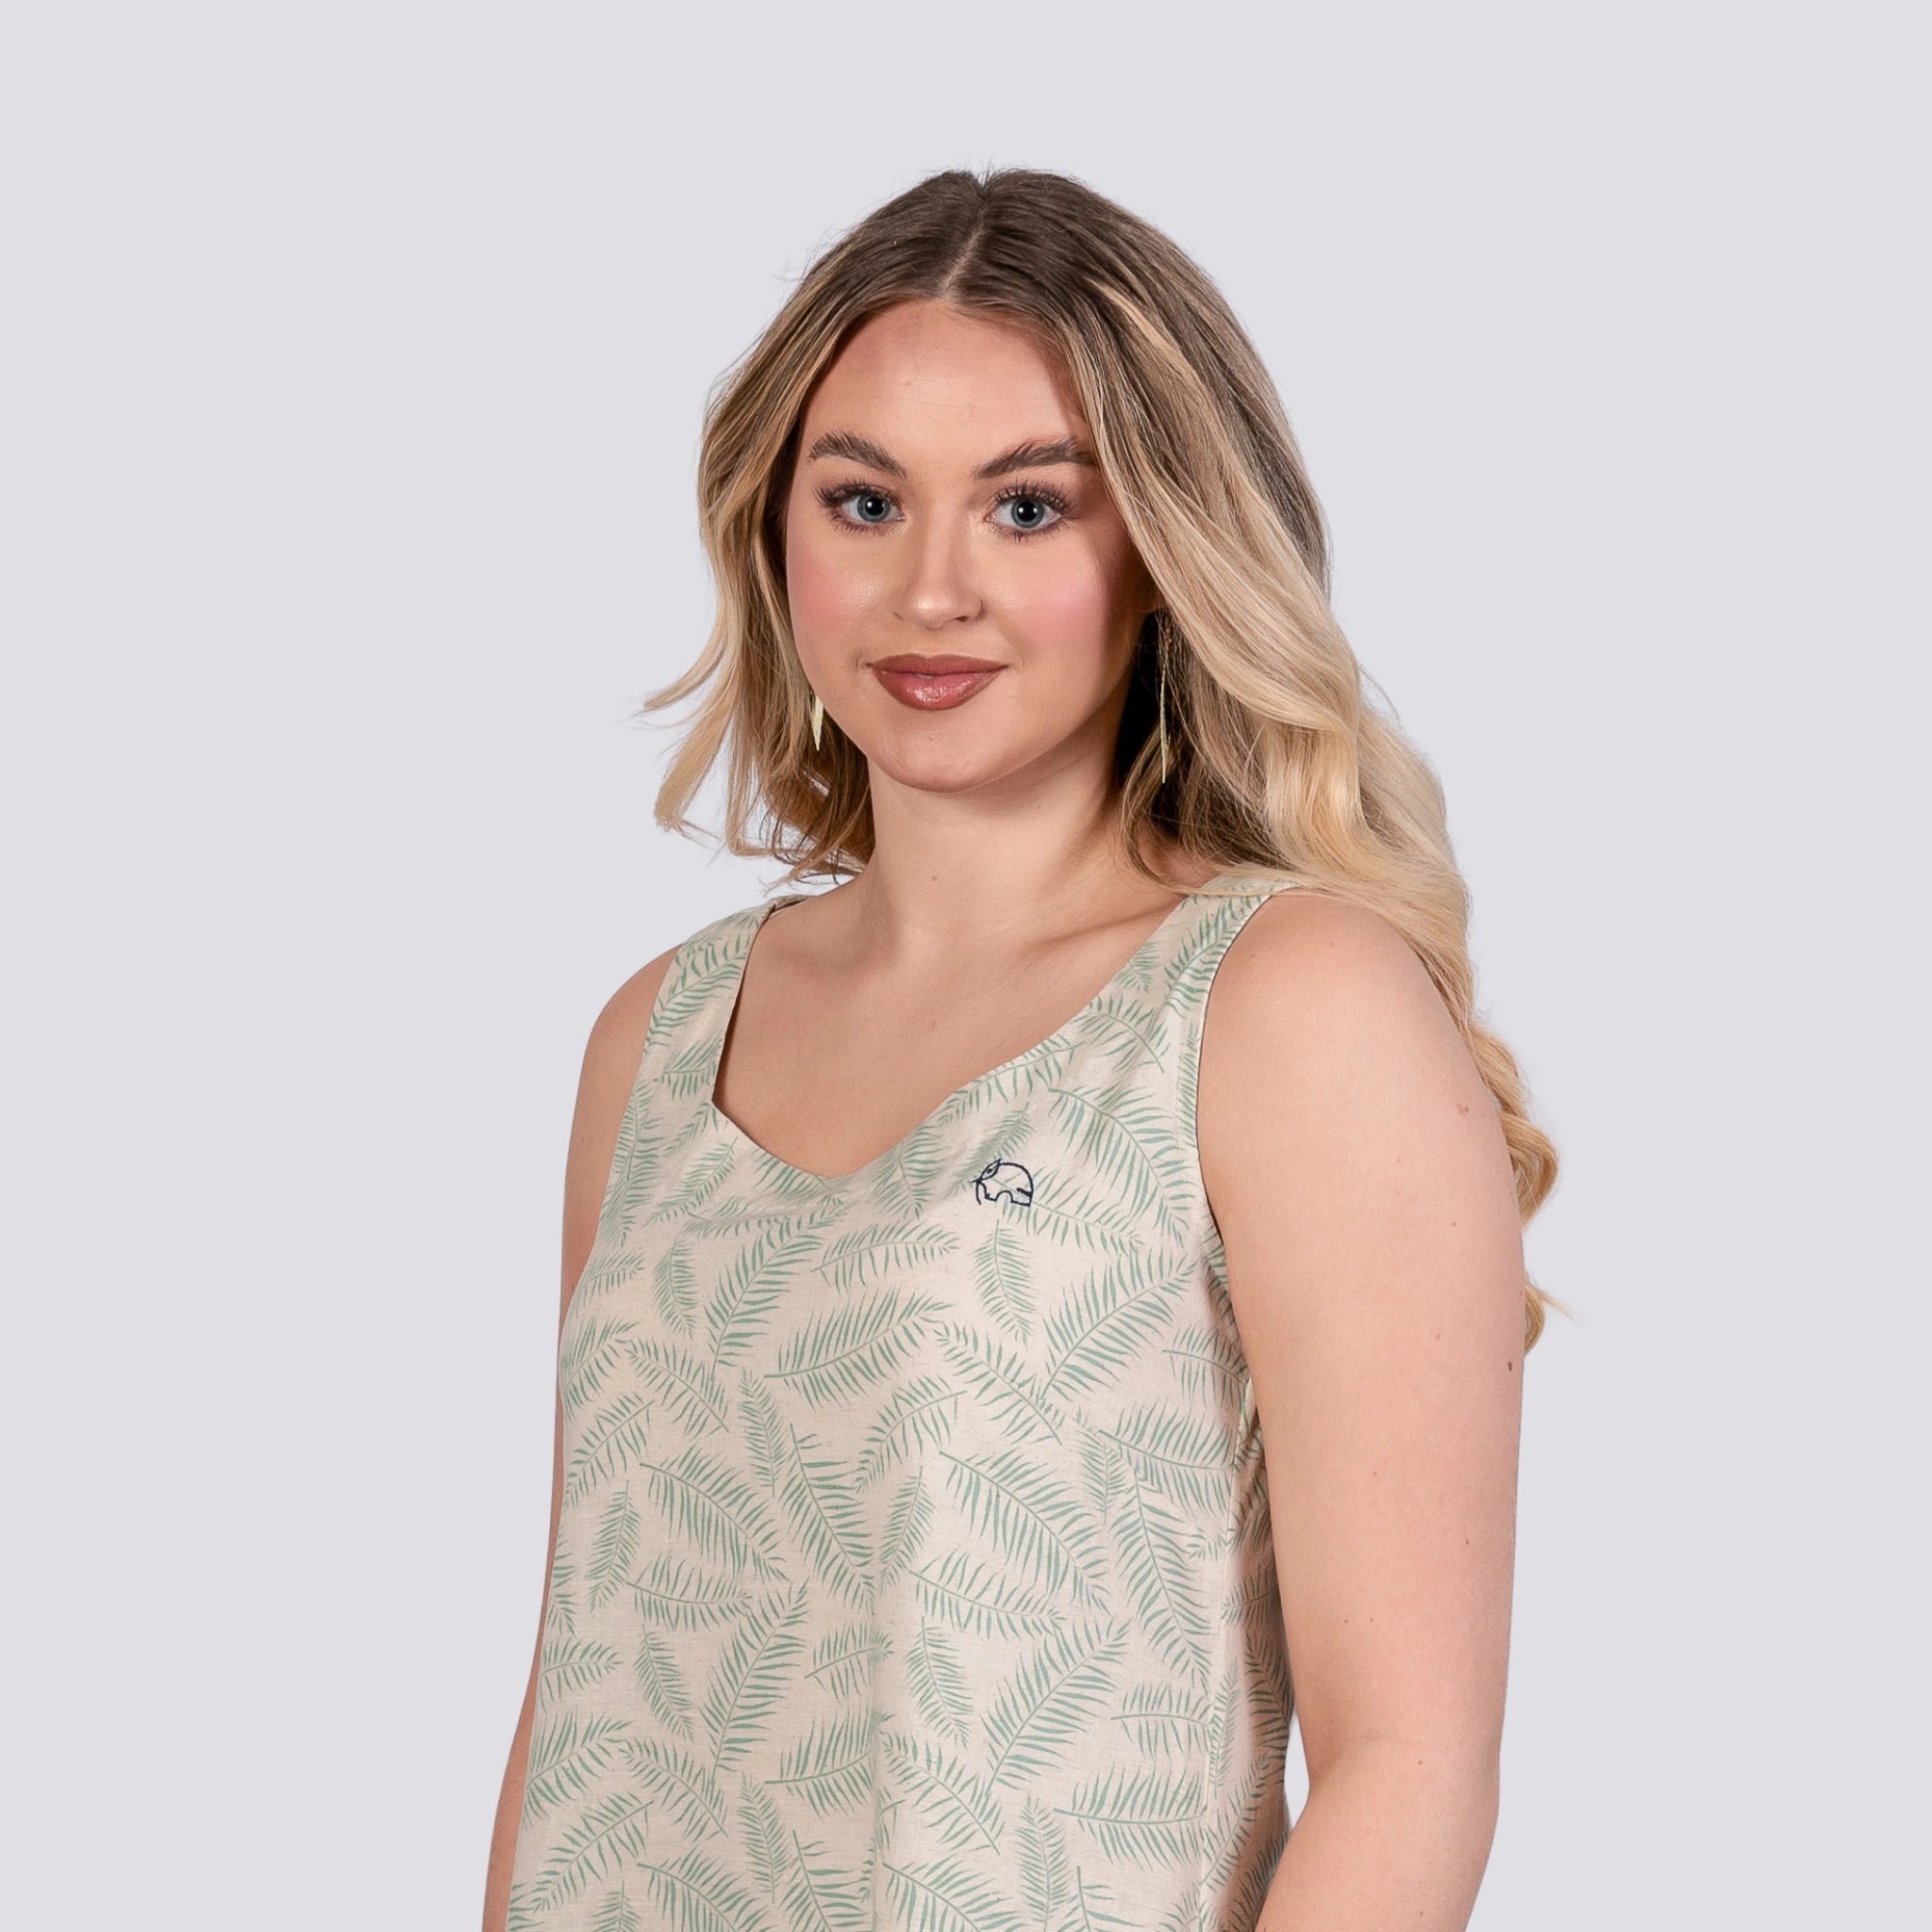 A woman with long blonde hair wears the Karee Eco-Luxe Look: Sustainable Mystic Breeze Linen Hi-Lo Midi Dress for Women, standing against a plain gray background.